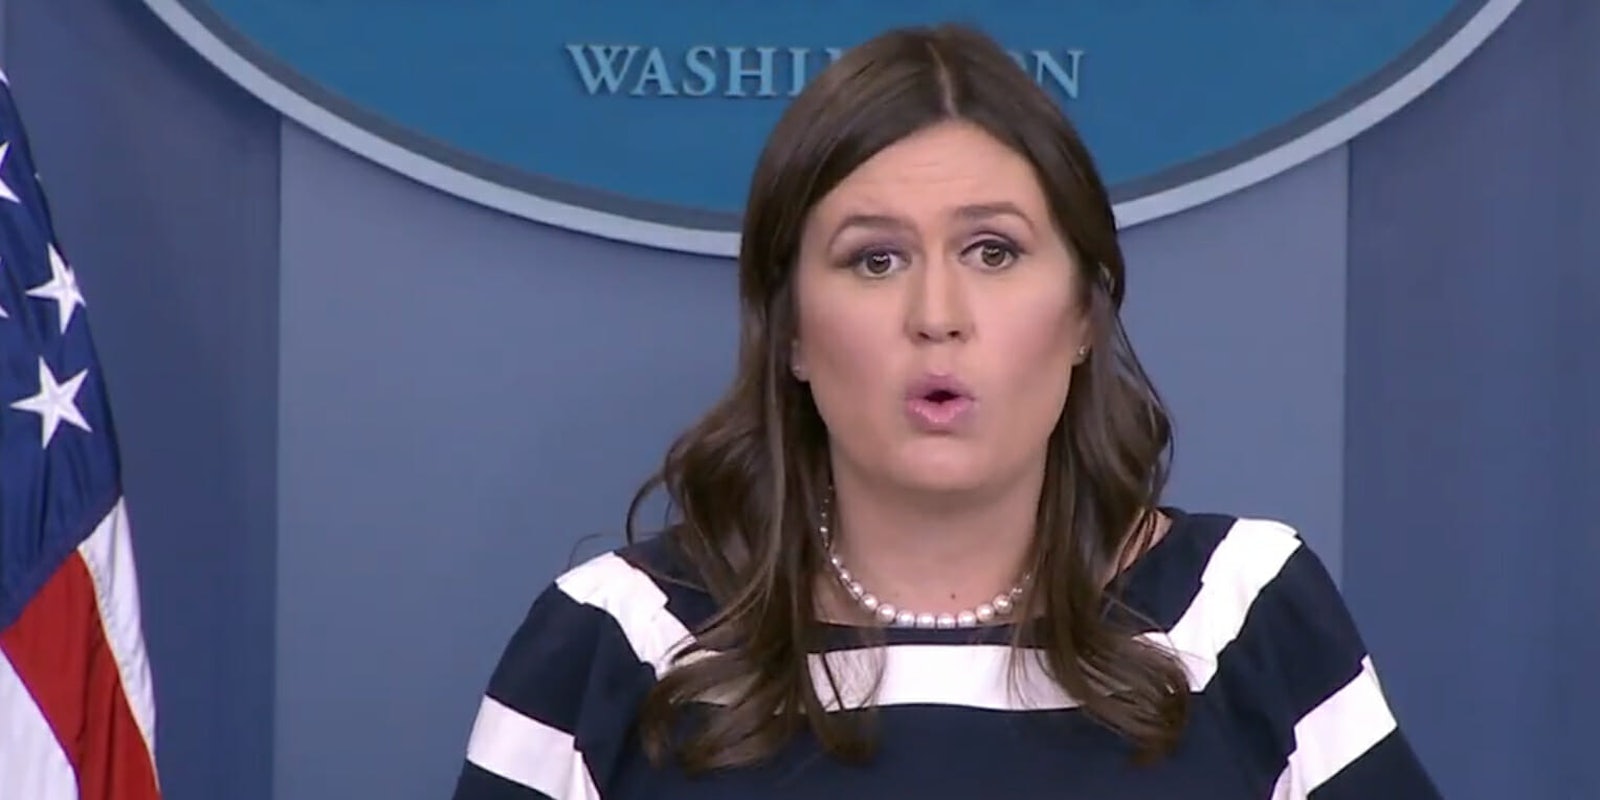 White House Press Secretary Sarah Huckabee Sanders said the payments between AT&T and President Donald Trump's longtime personal lawyer Michael Cohen was the 'definition of draining the swamp.'